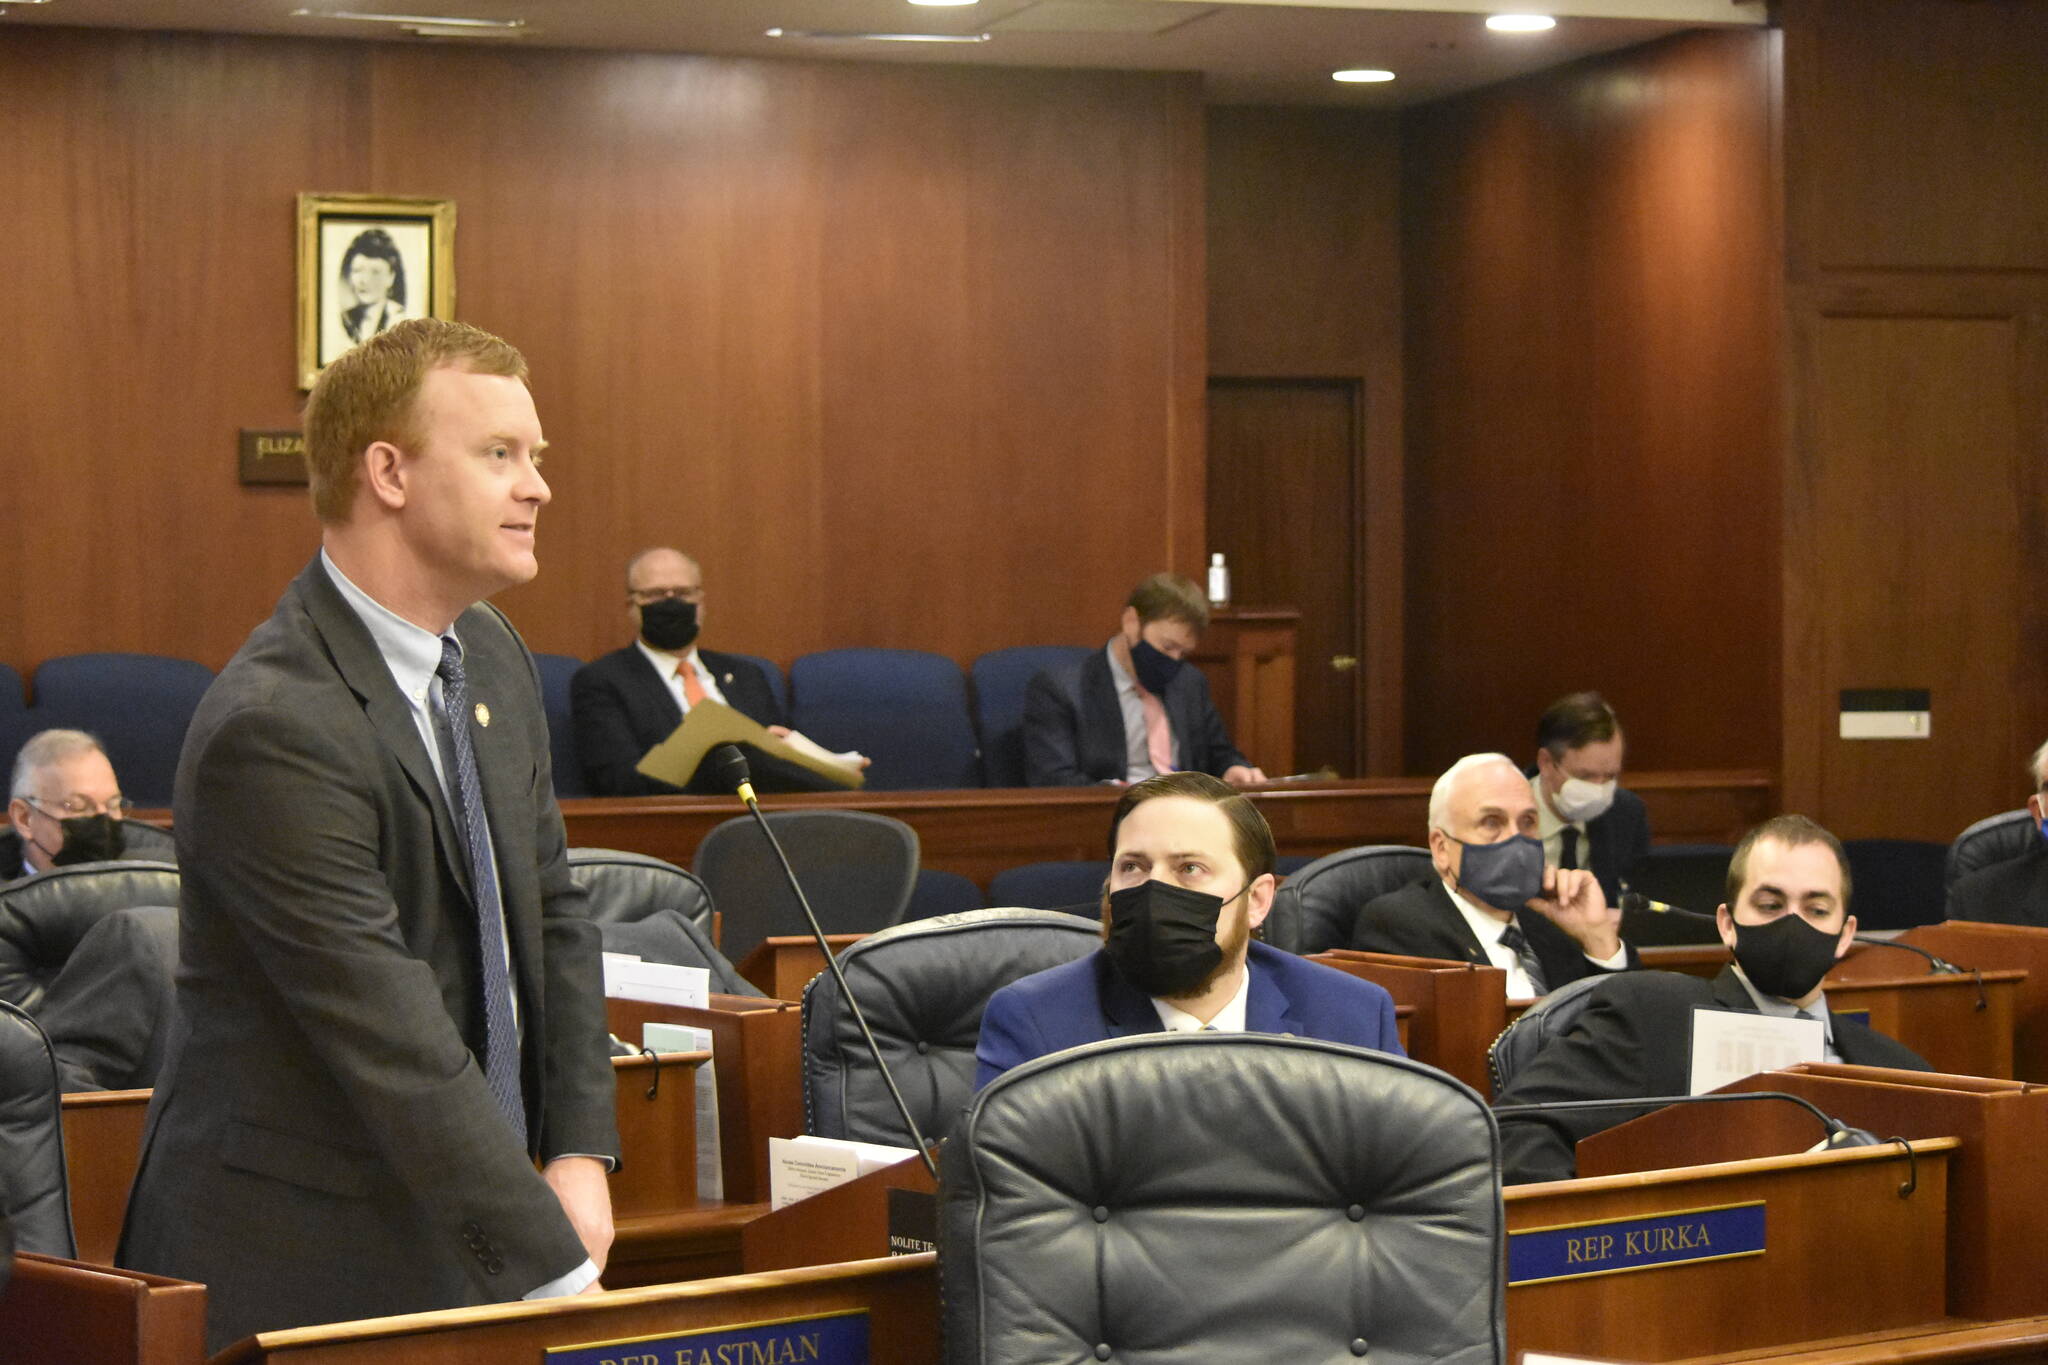 Rep. David Eastman, R-Wasilla, speaks on the floor of the Alaska House of Representatives during a floor debate on Tuesday, Aug. 31, 2021, over an appropriations bill during the Legislature’s third special session of the summer. Multiple organizations reported on Wednesday that Eastman is a lifetime member of the far-right organization the Oath Keepers. (Peter Segall / Juneau Empire)